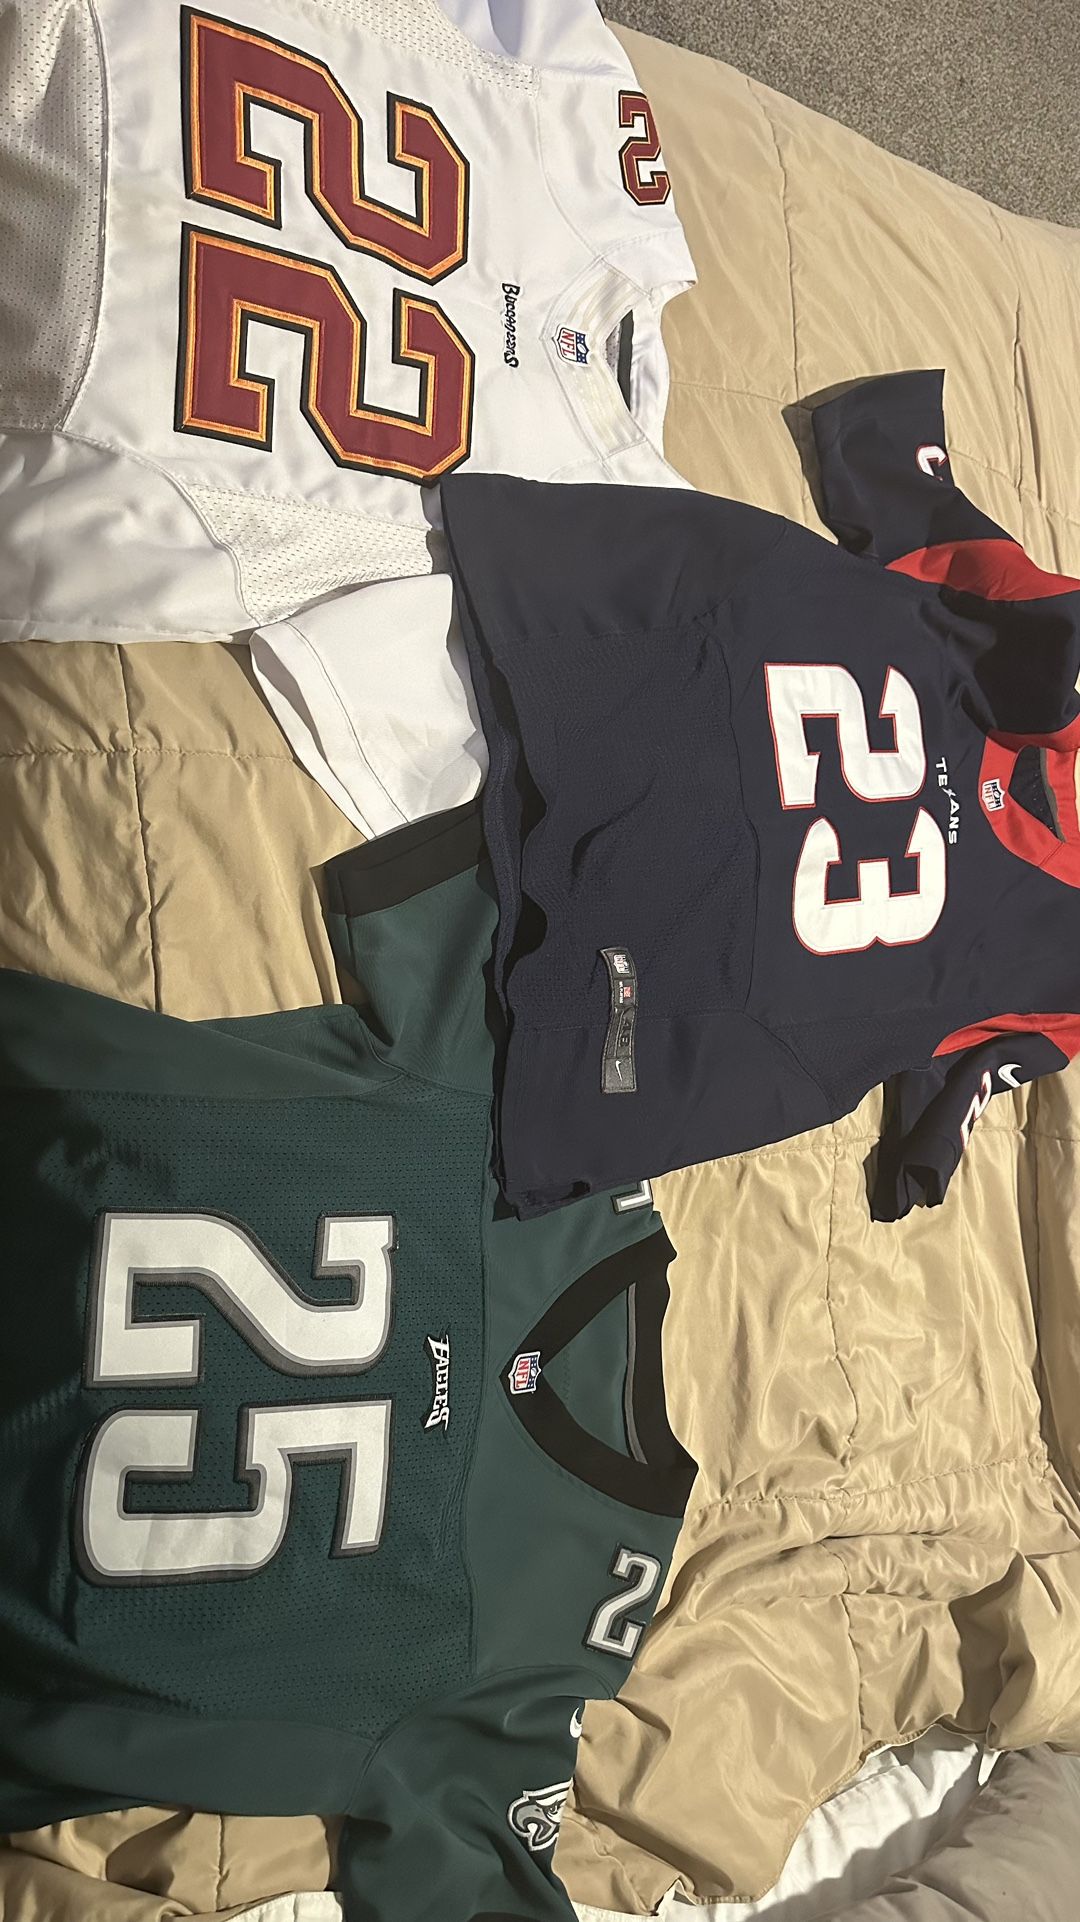 NFL Jersey Large And XL